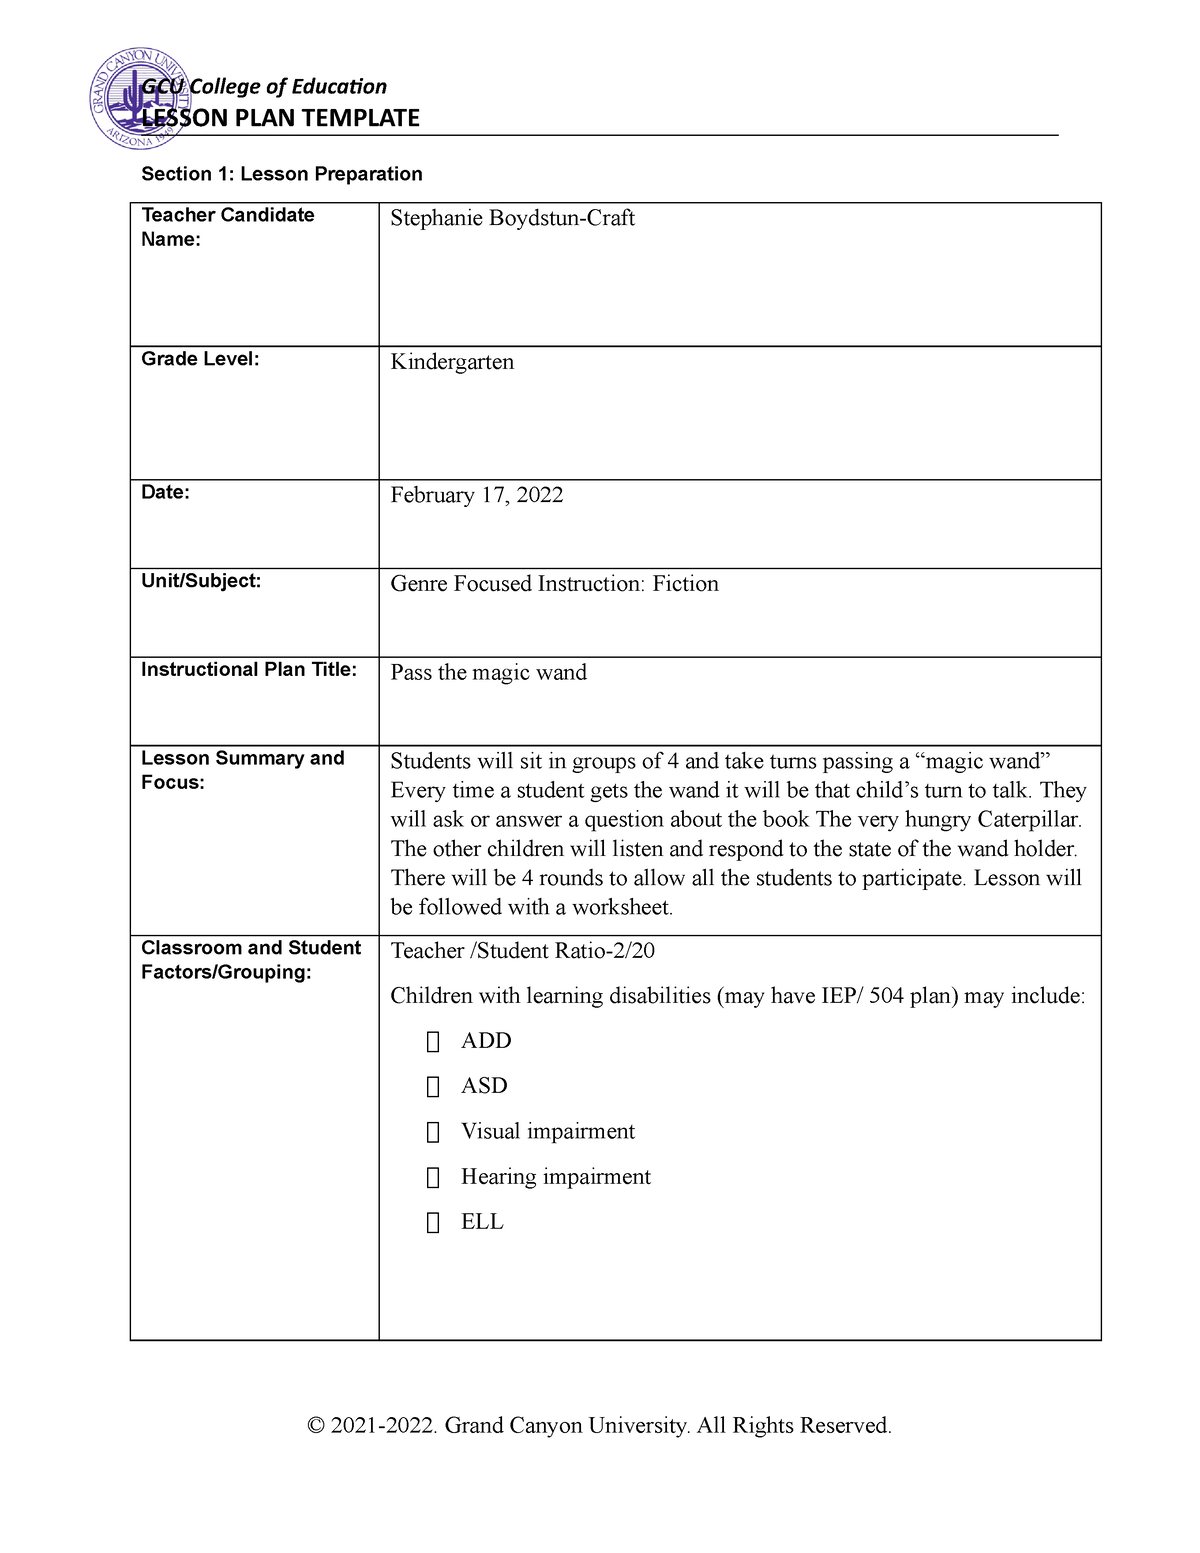 Genre Focused Attention - LESSON PLAN TEMPLATE Section 1: Lesson ...